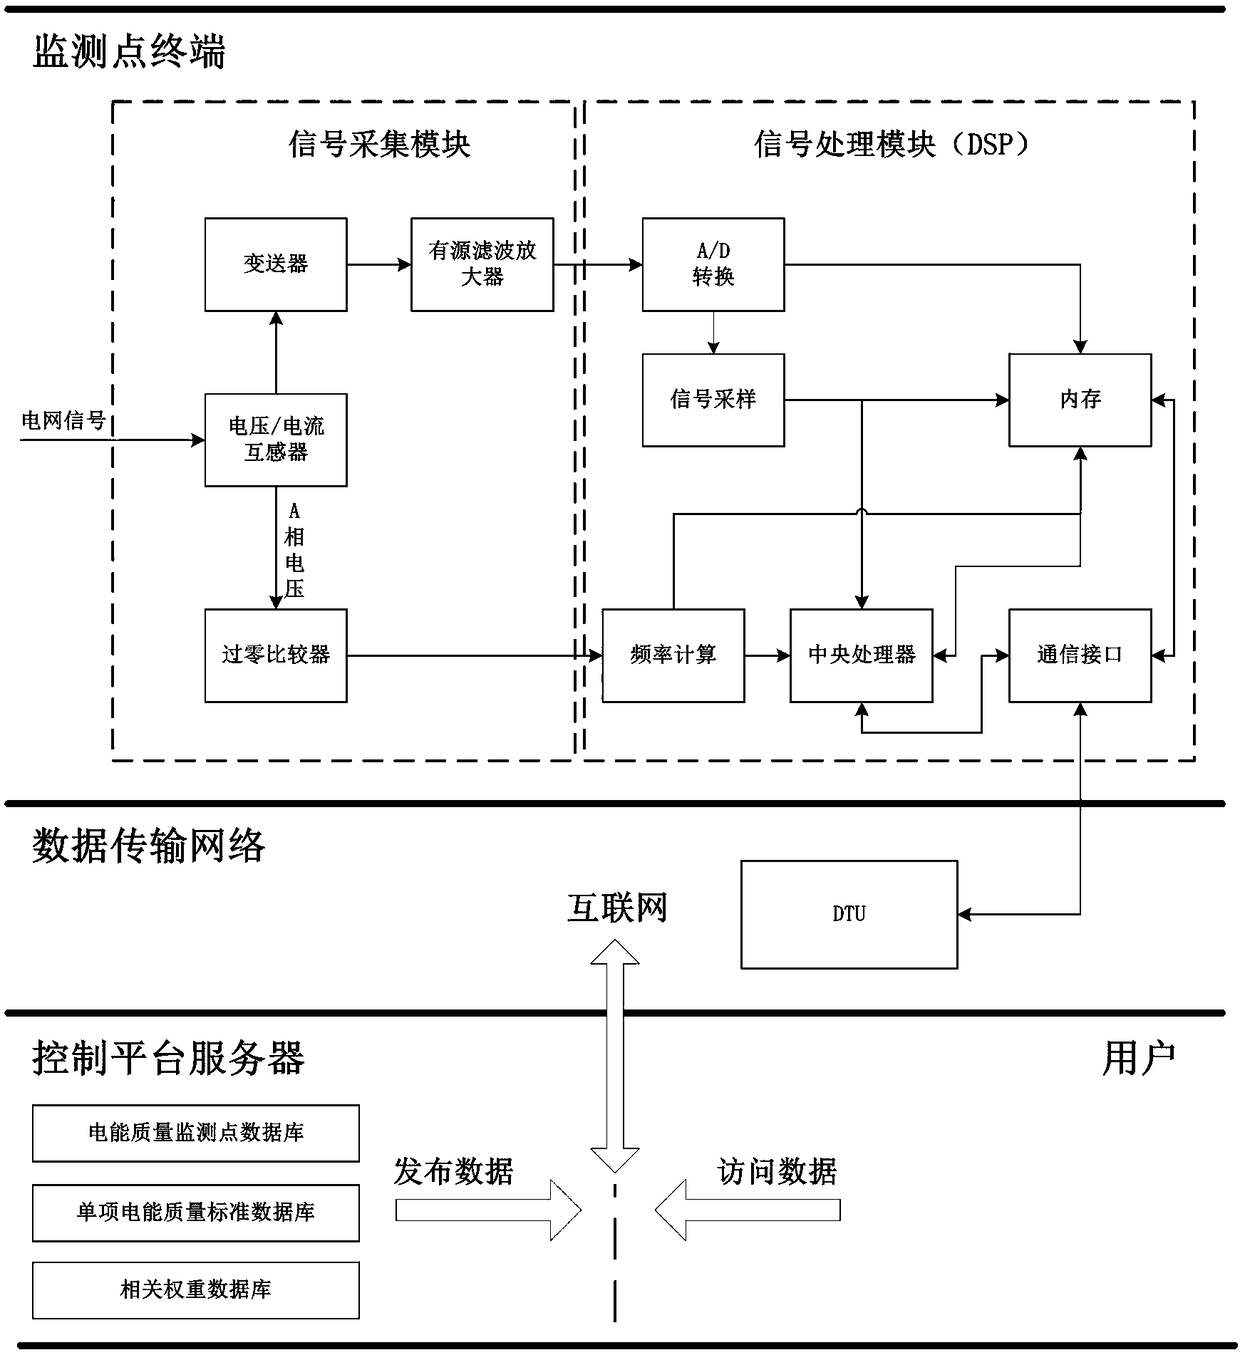 Comprehensive evaluation system and method for user-side power quality